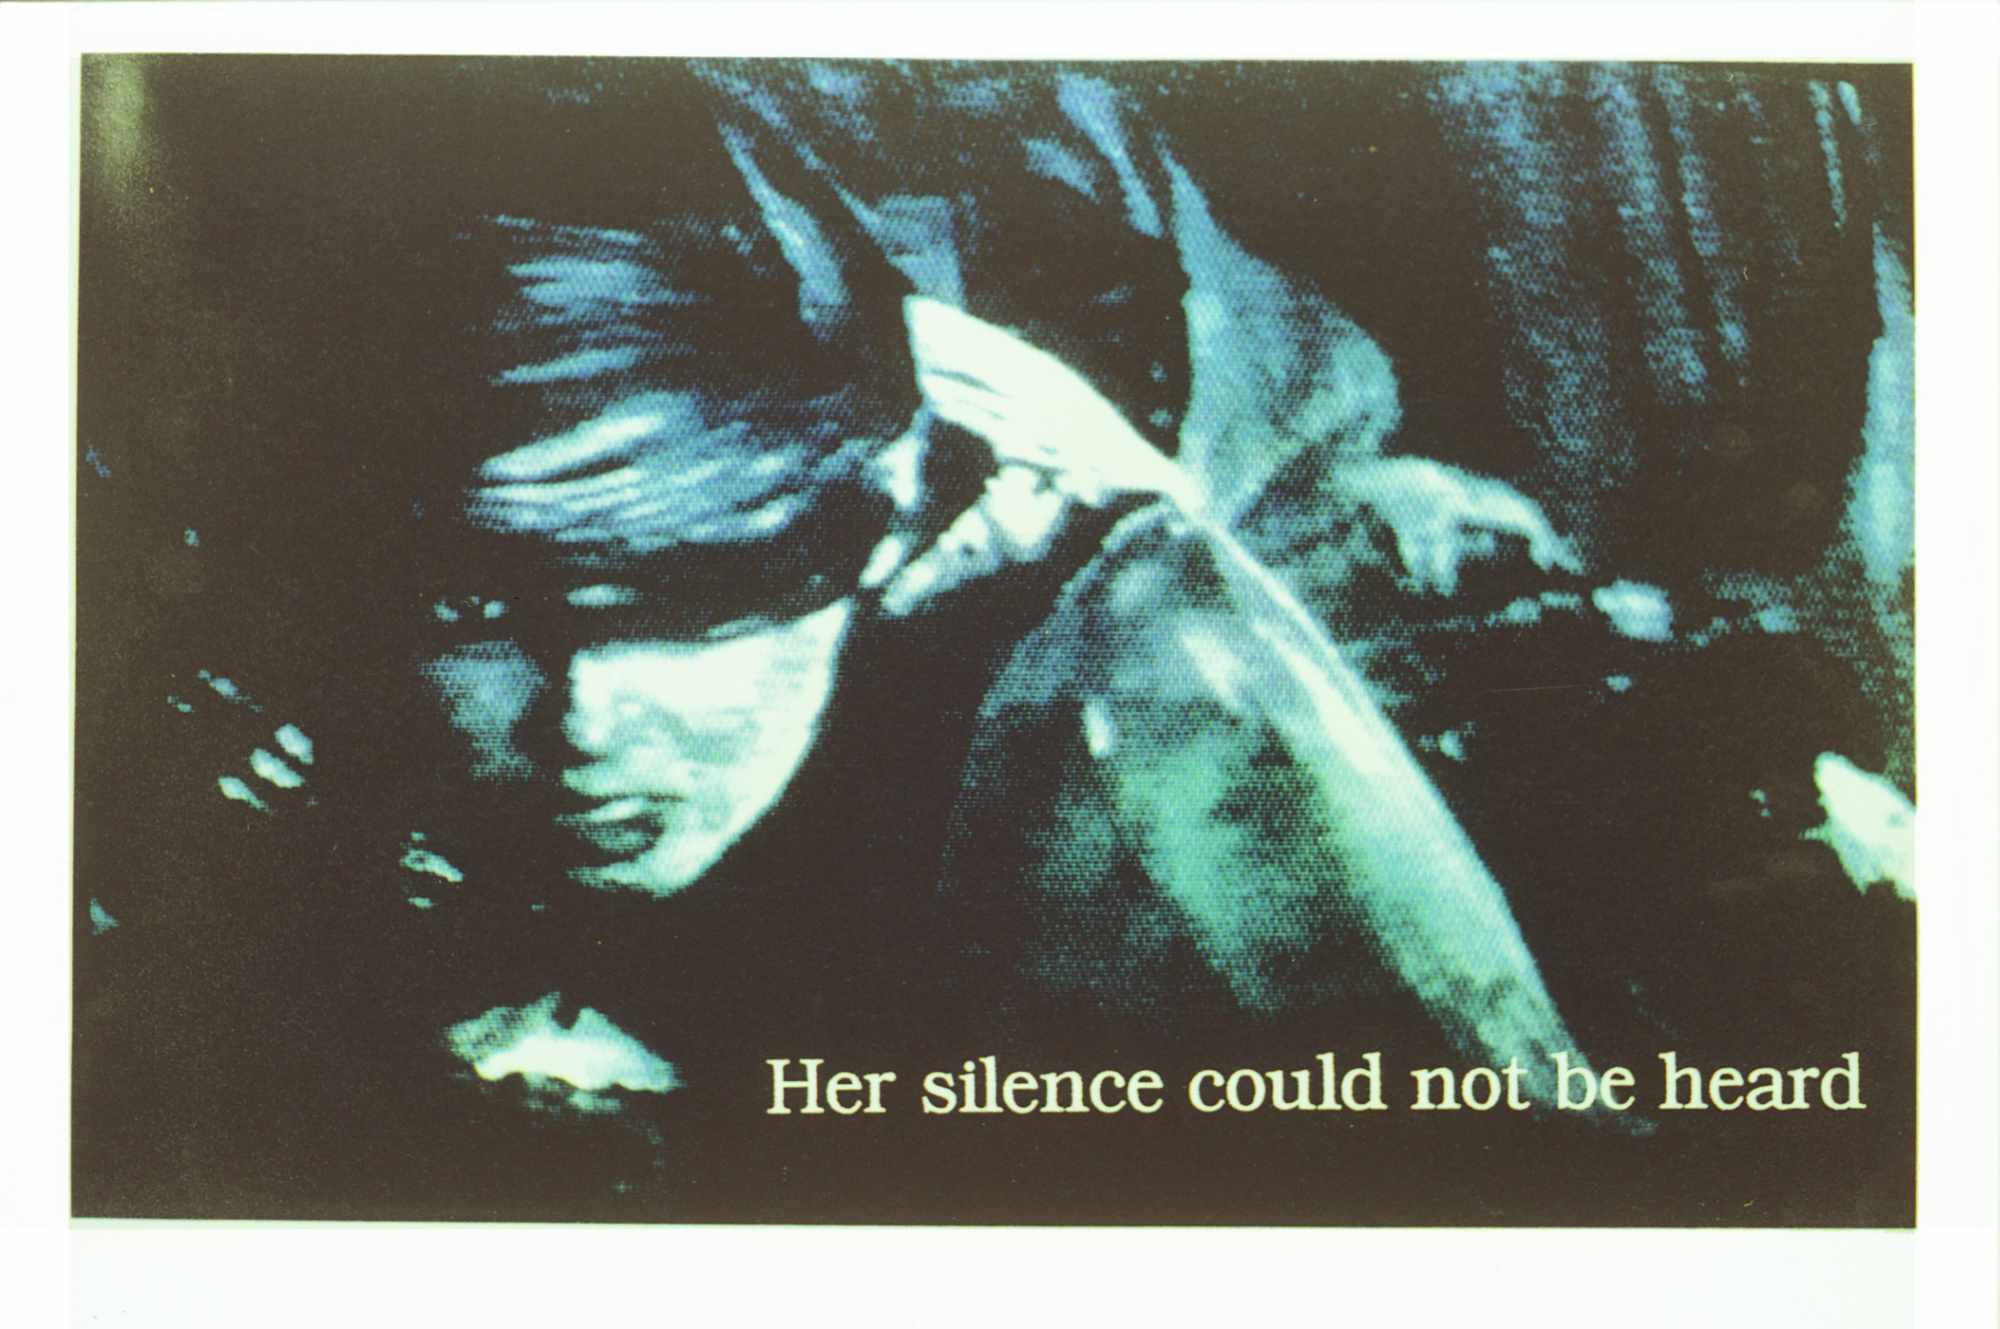 Her Silence - Type C Mural Print - 1200 x 1000mm